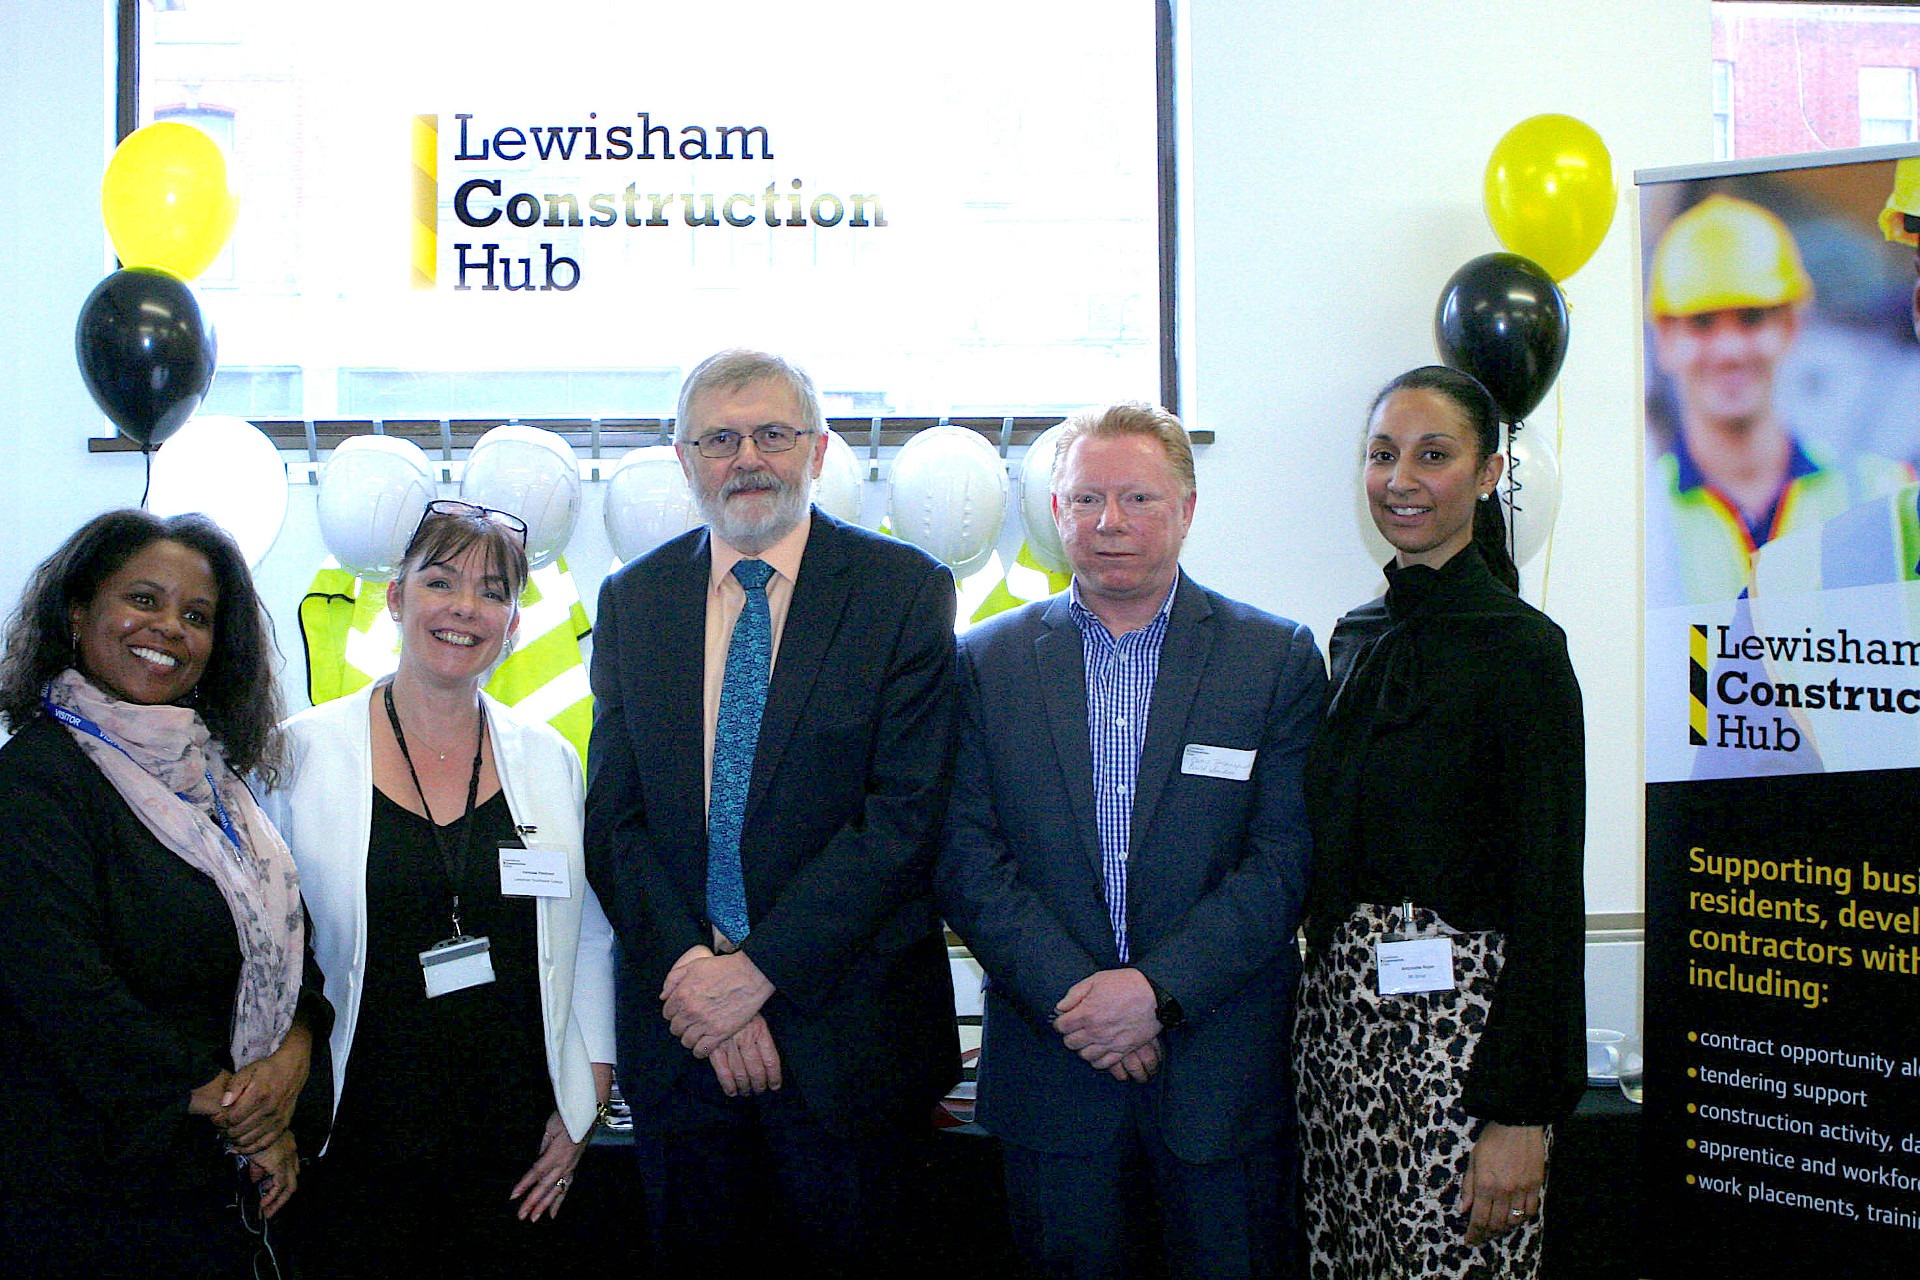 Lewisham Construction Hub officially opens